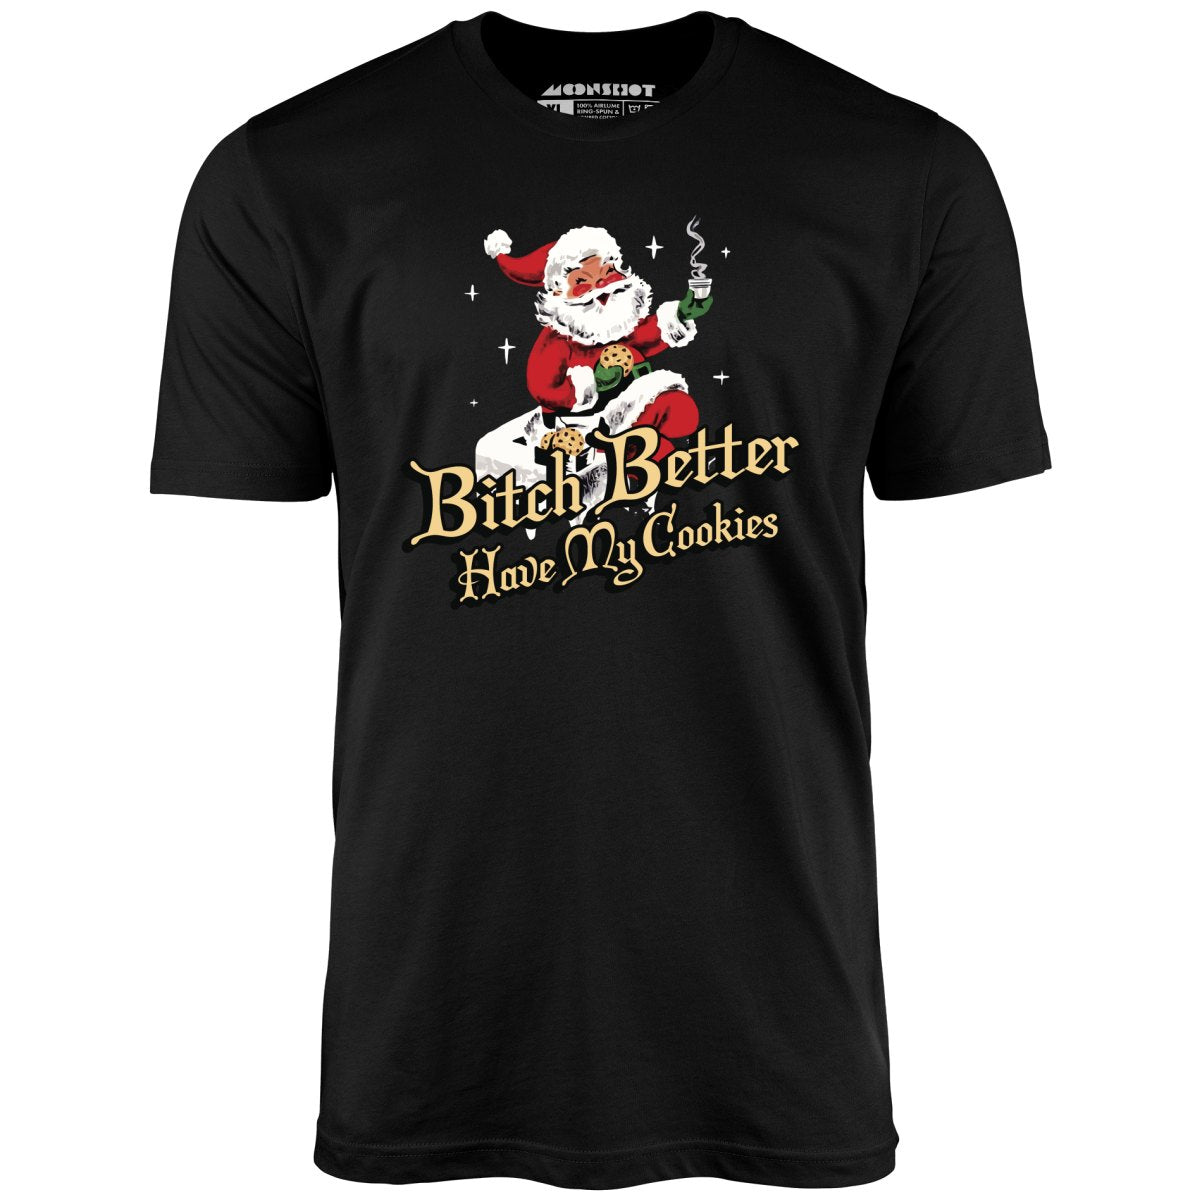 Bitch Better Have My Cookies - Unisex T-Shirt